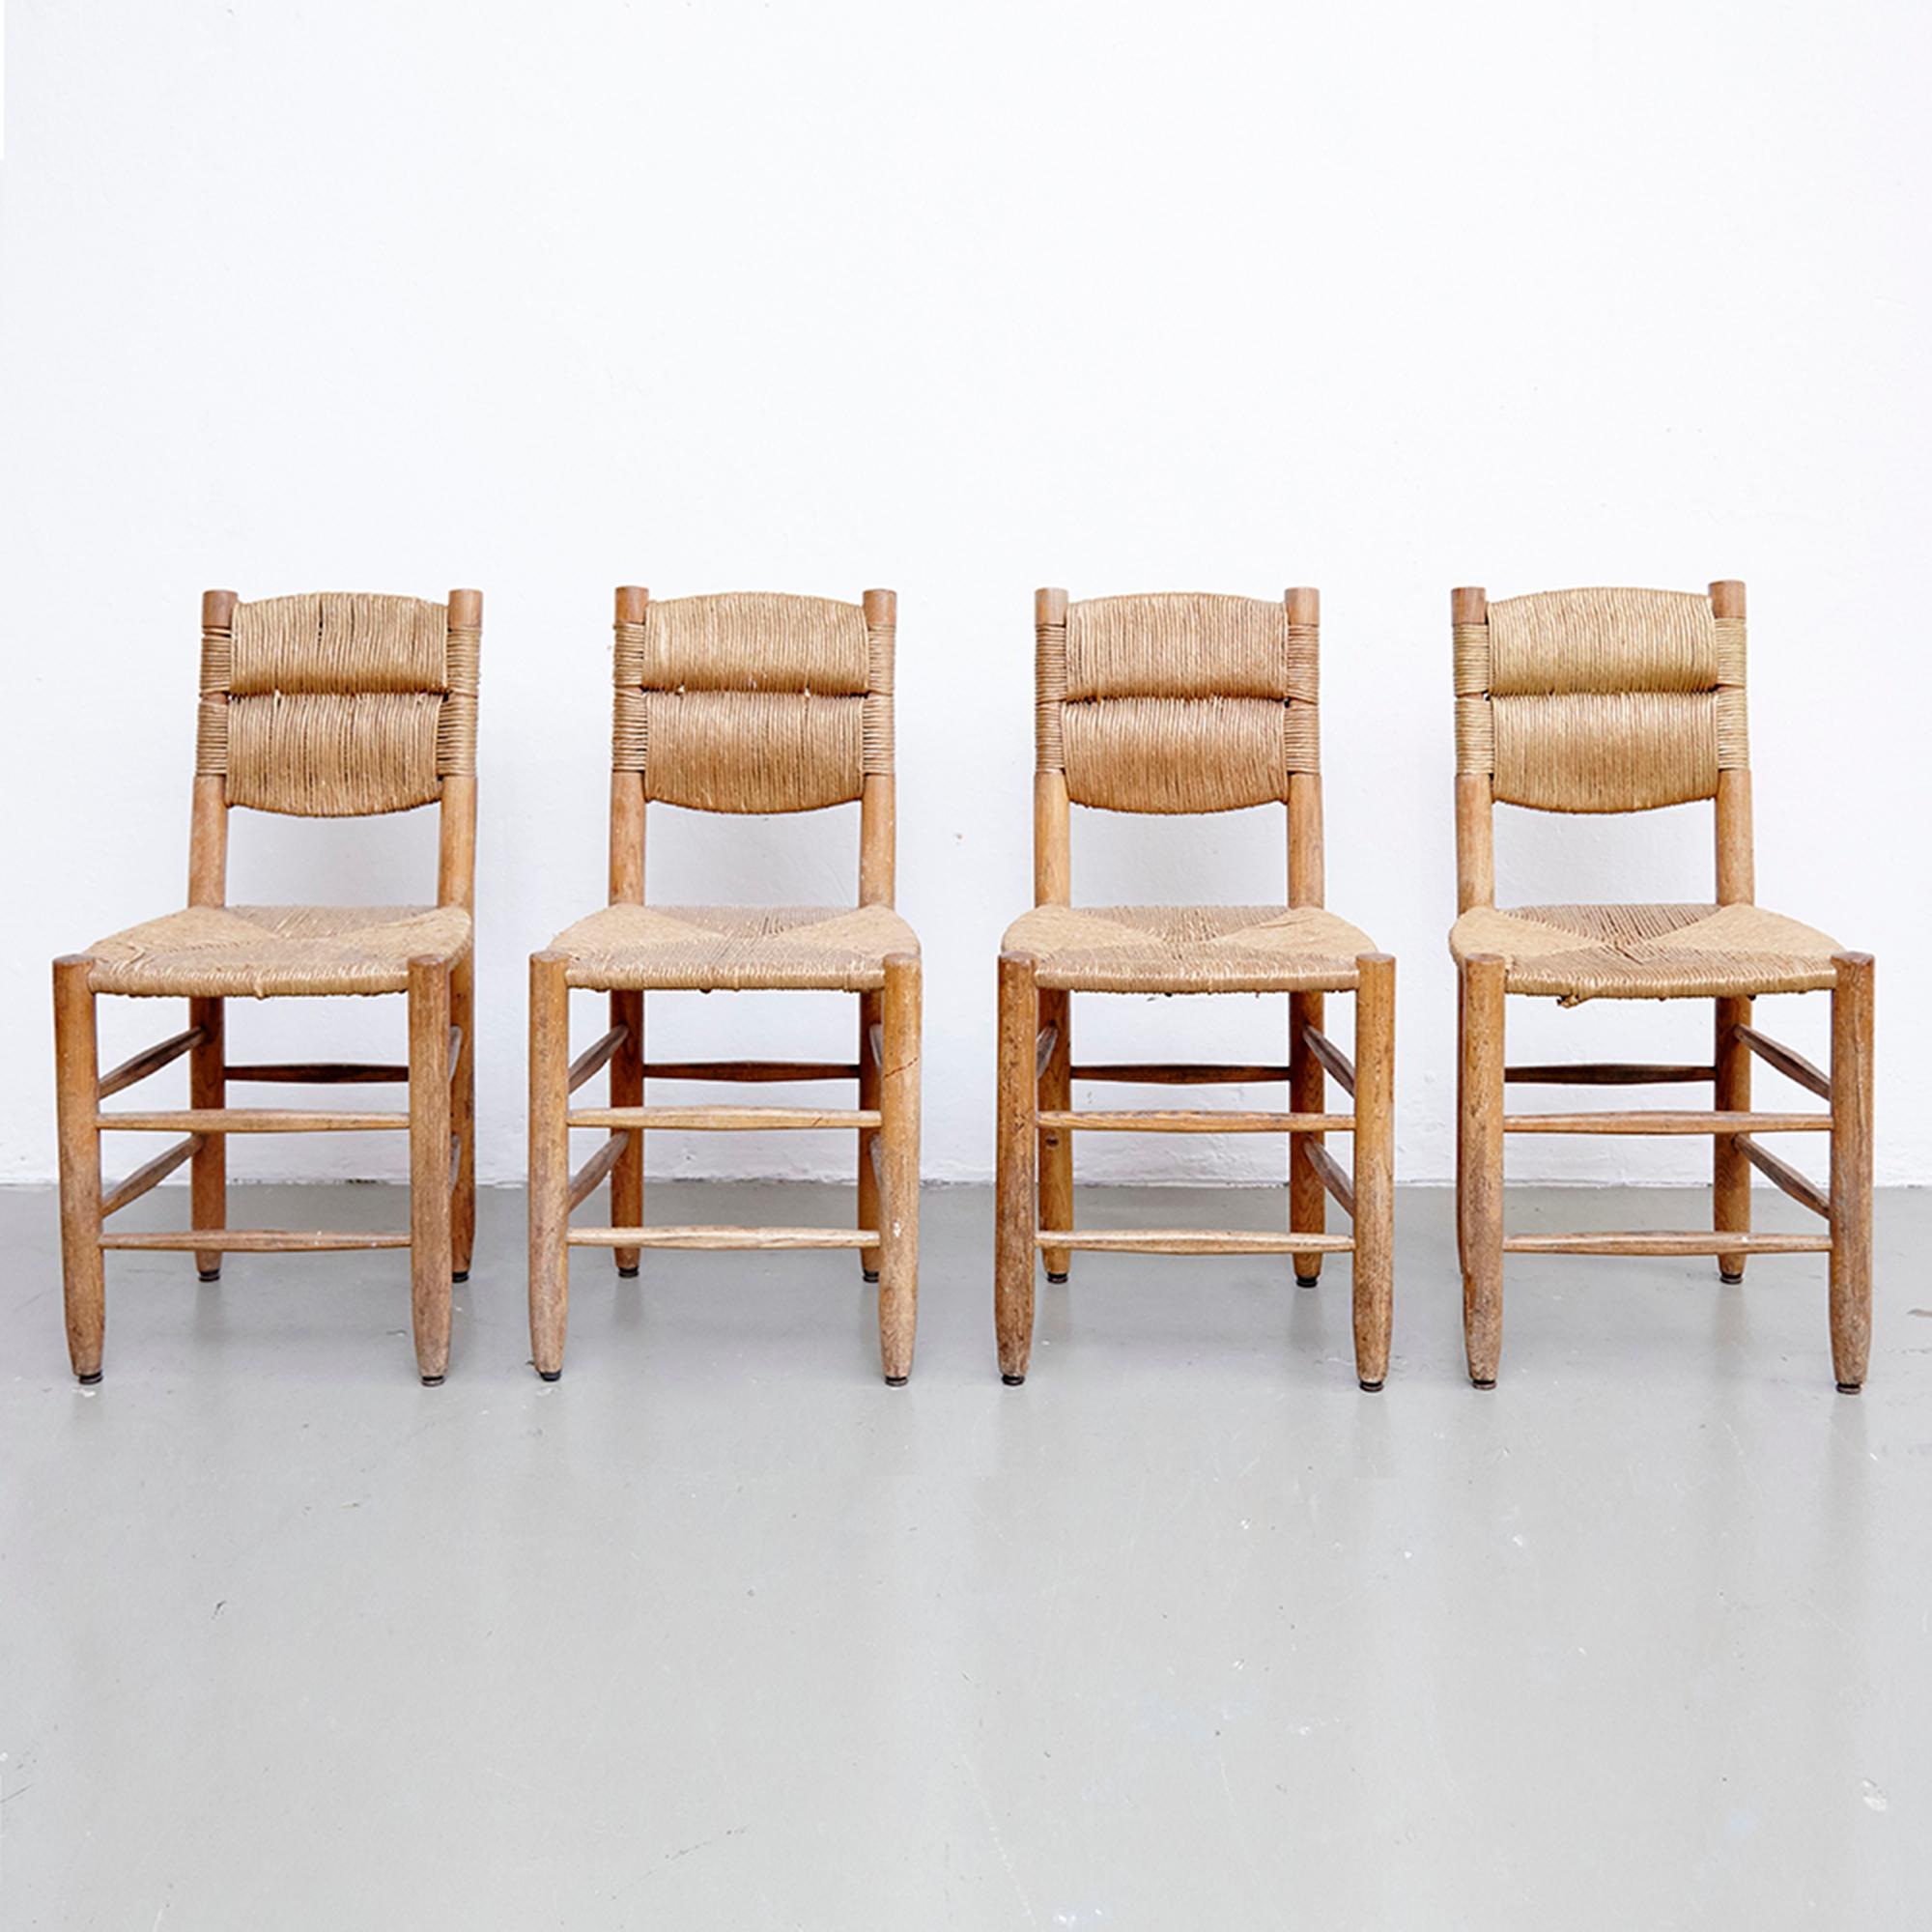 Set of four chairs designed by Charlotte Perriand, circa 1950.
Manufactured in France.

In good original condition, with minor wear consistent with age and use, preserving a beautiful patina. 

Charlotte Perriand (1903-1999) she was born in